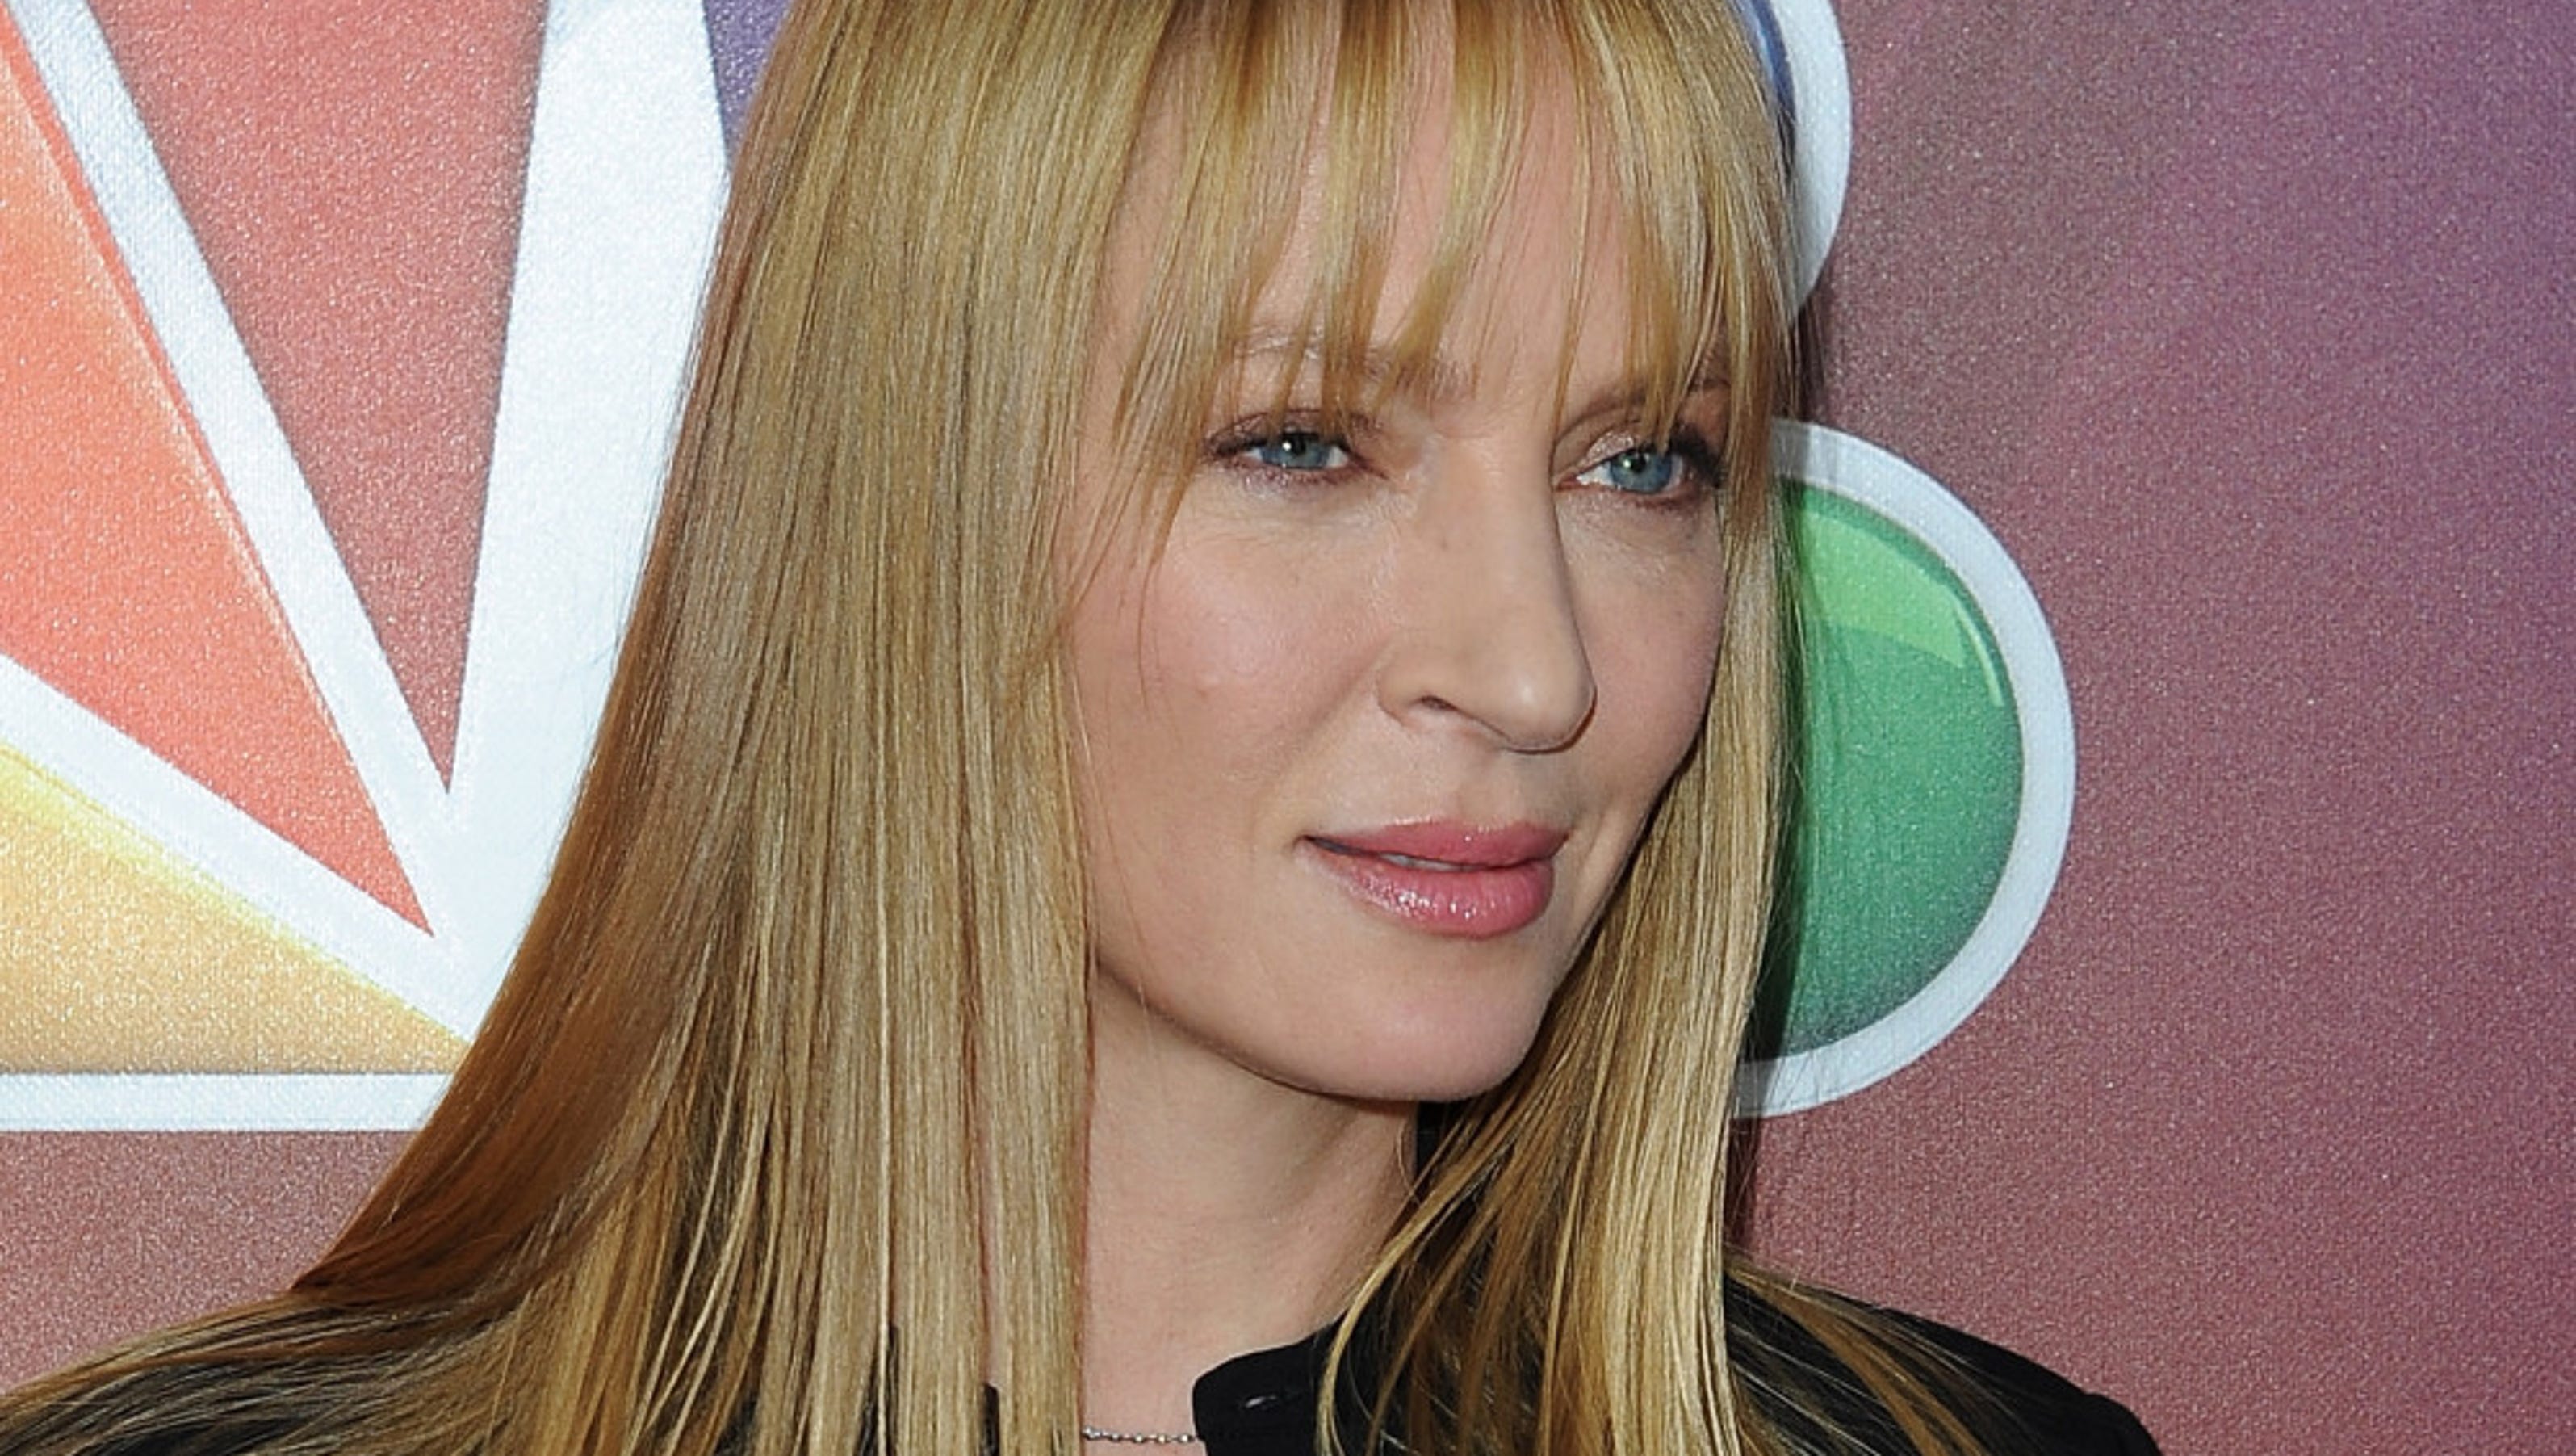 What happened to Uma Thurman's face?